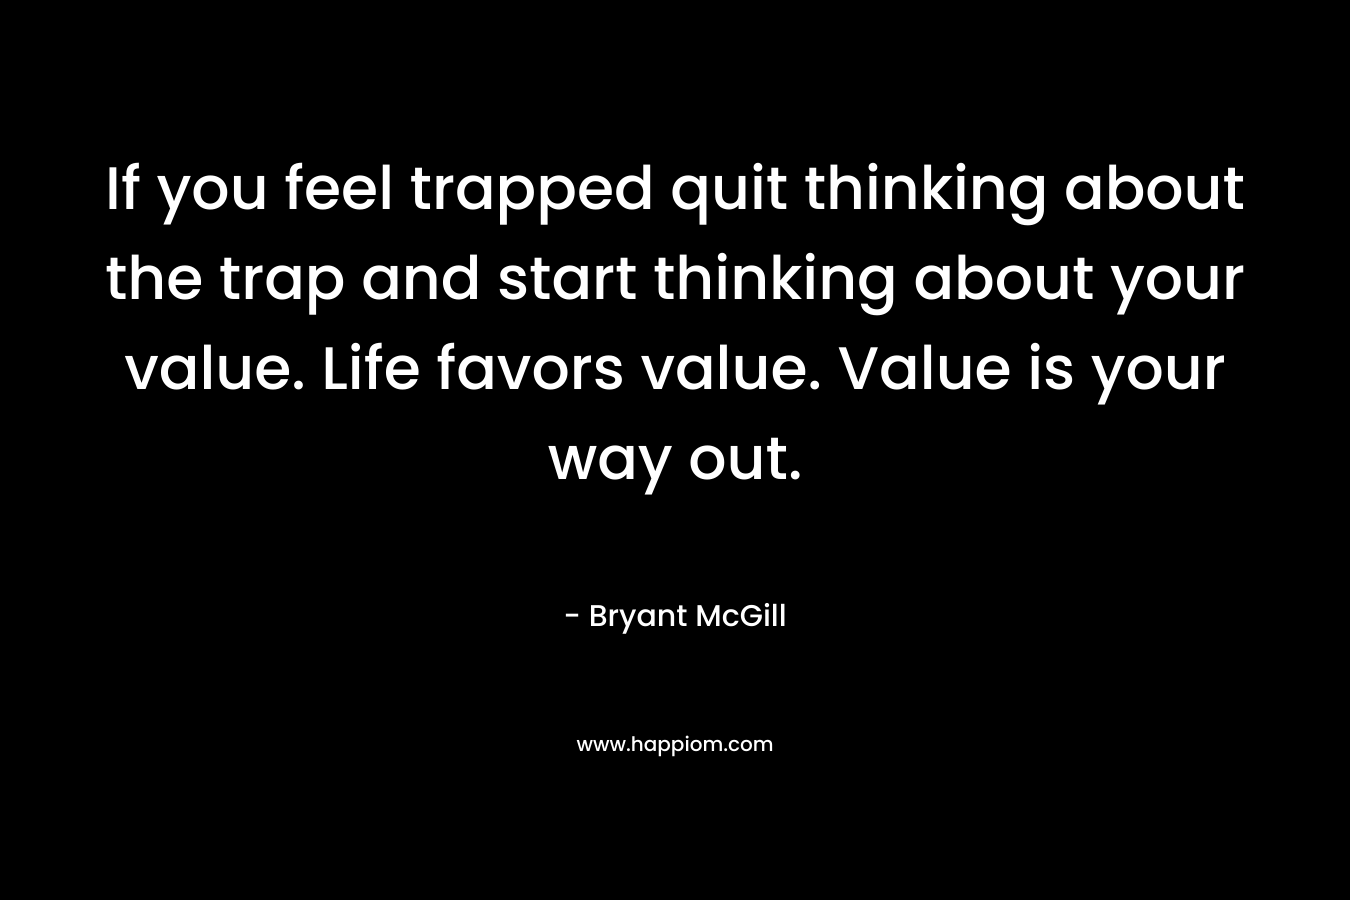 If you feel trapped quit thinking about the trap and start thinking about your value. Life favors value. Value is your way out. – Bryant McGill